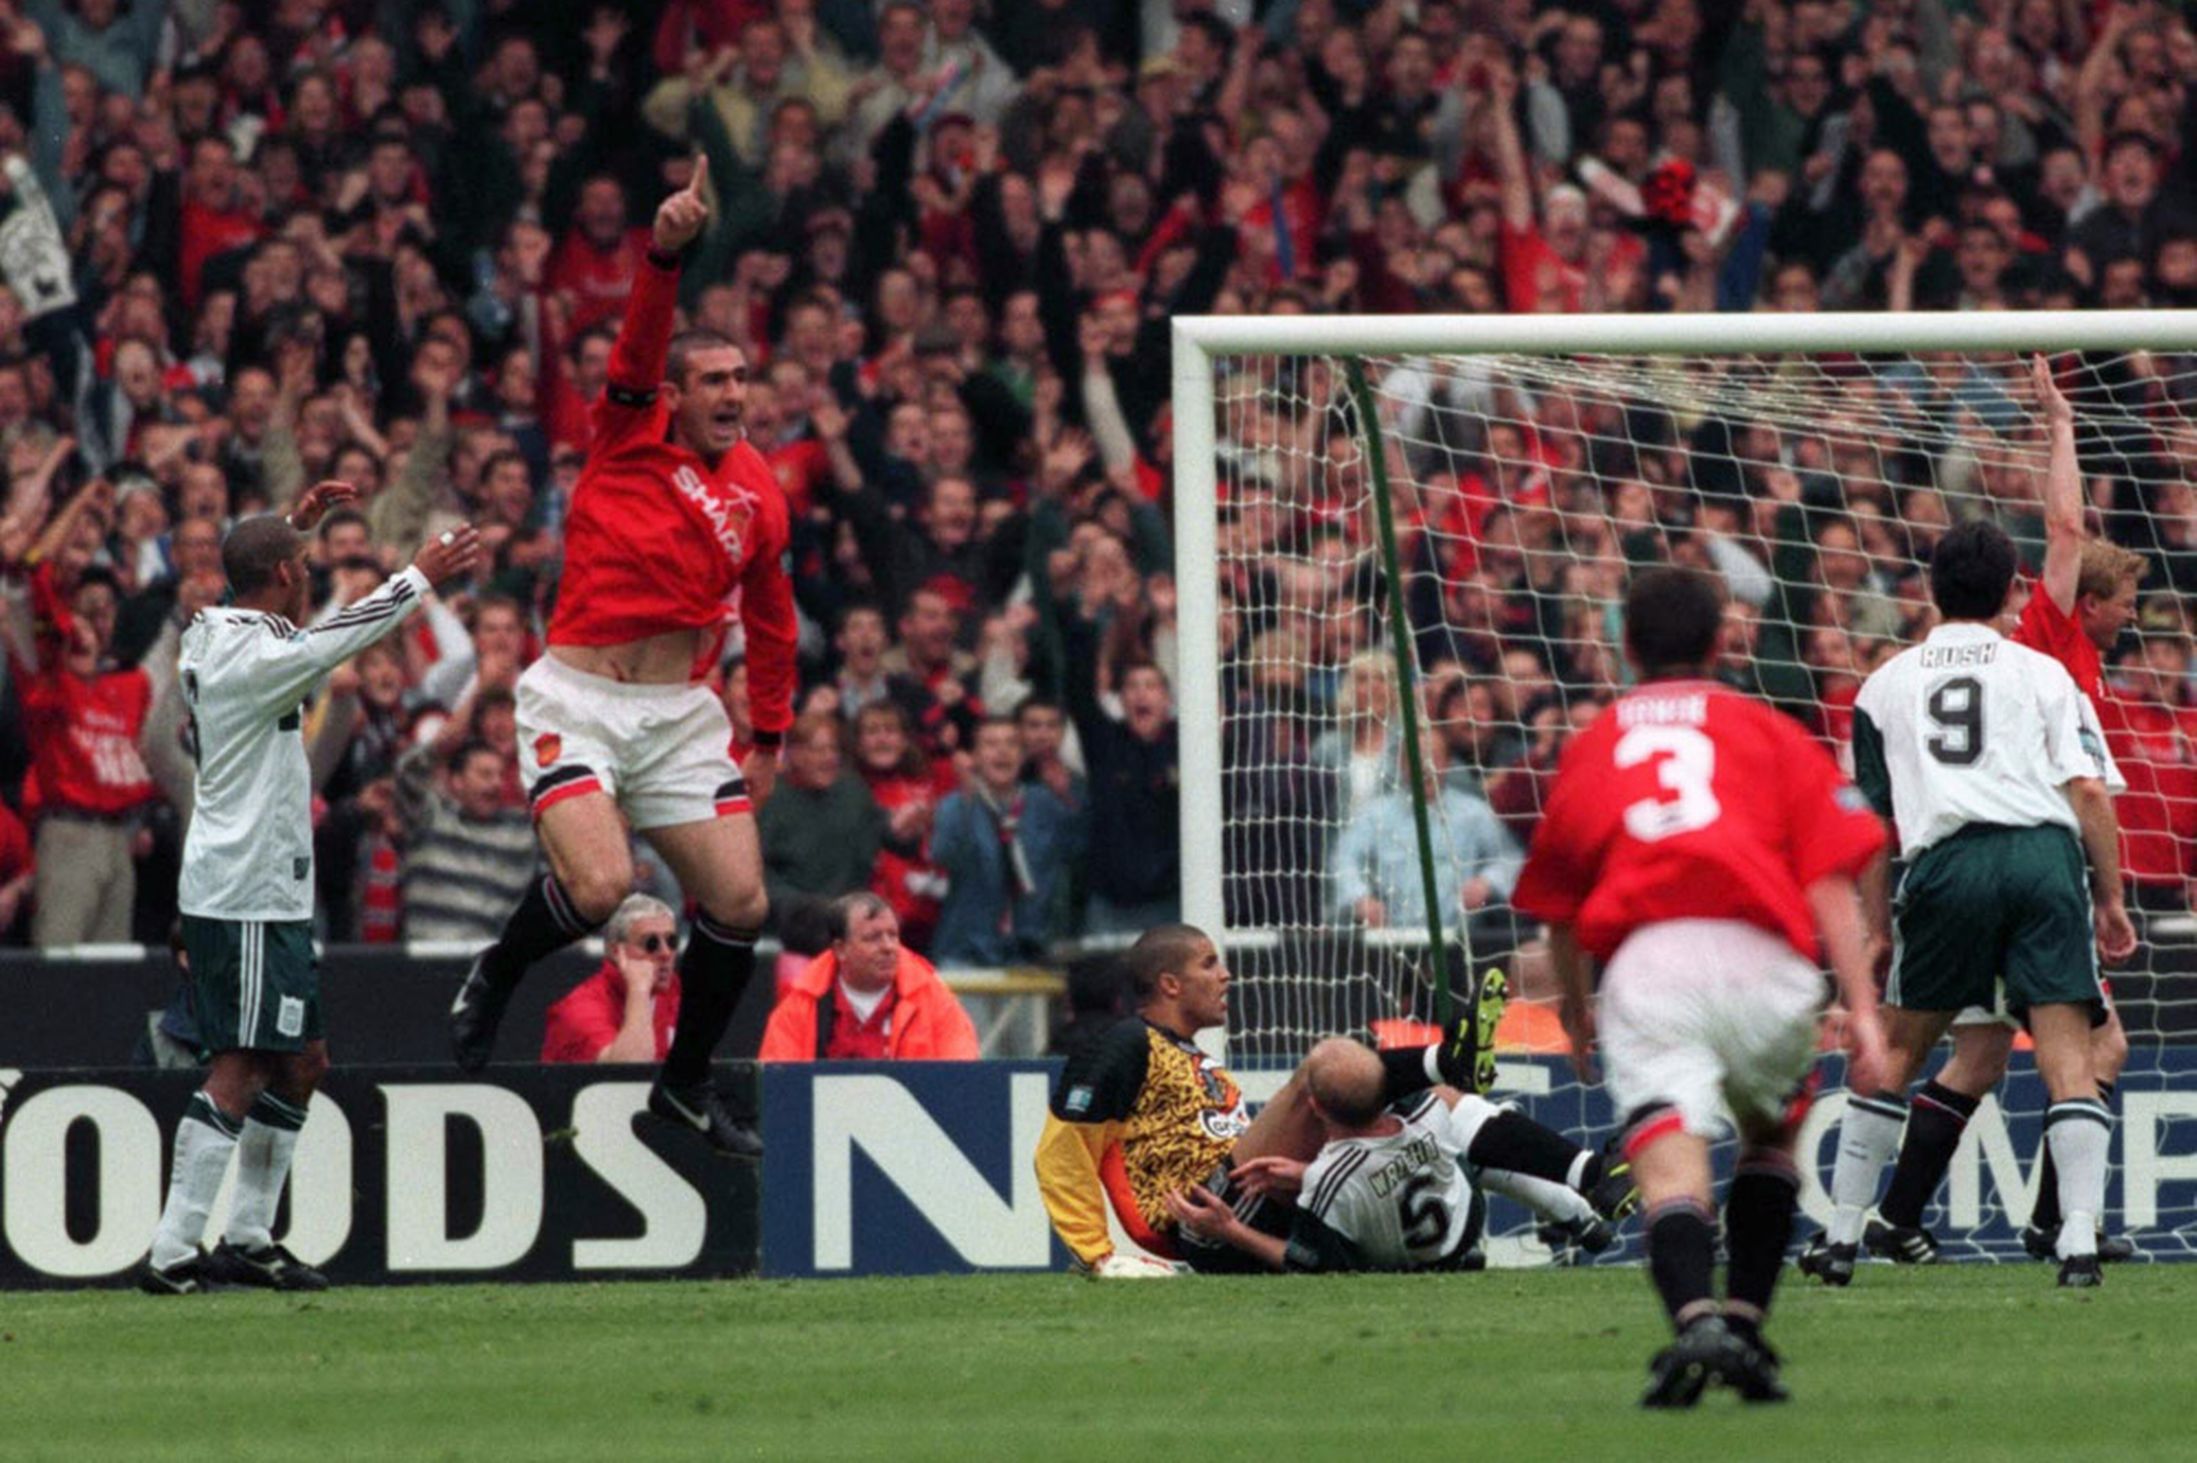 Eric%20Cantona%20scores%20in%20the%201996%20FA%20Cup%20Final%20at%20Wembley